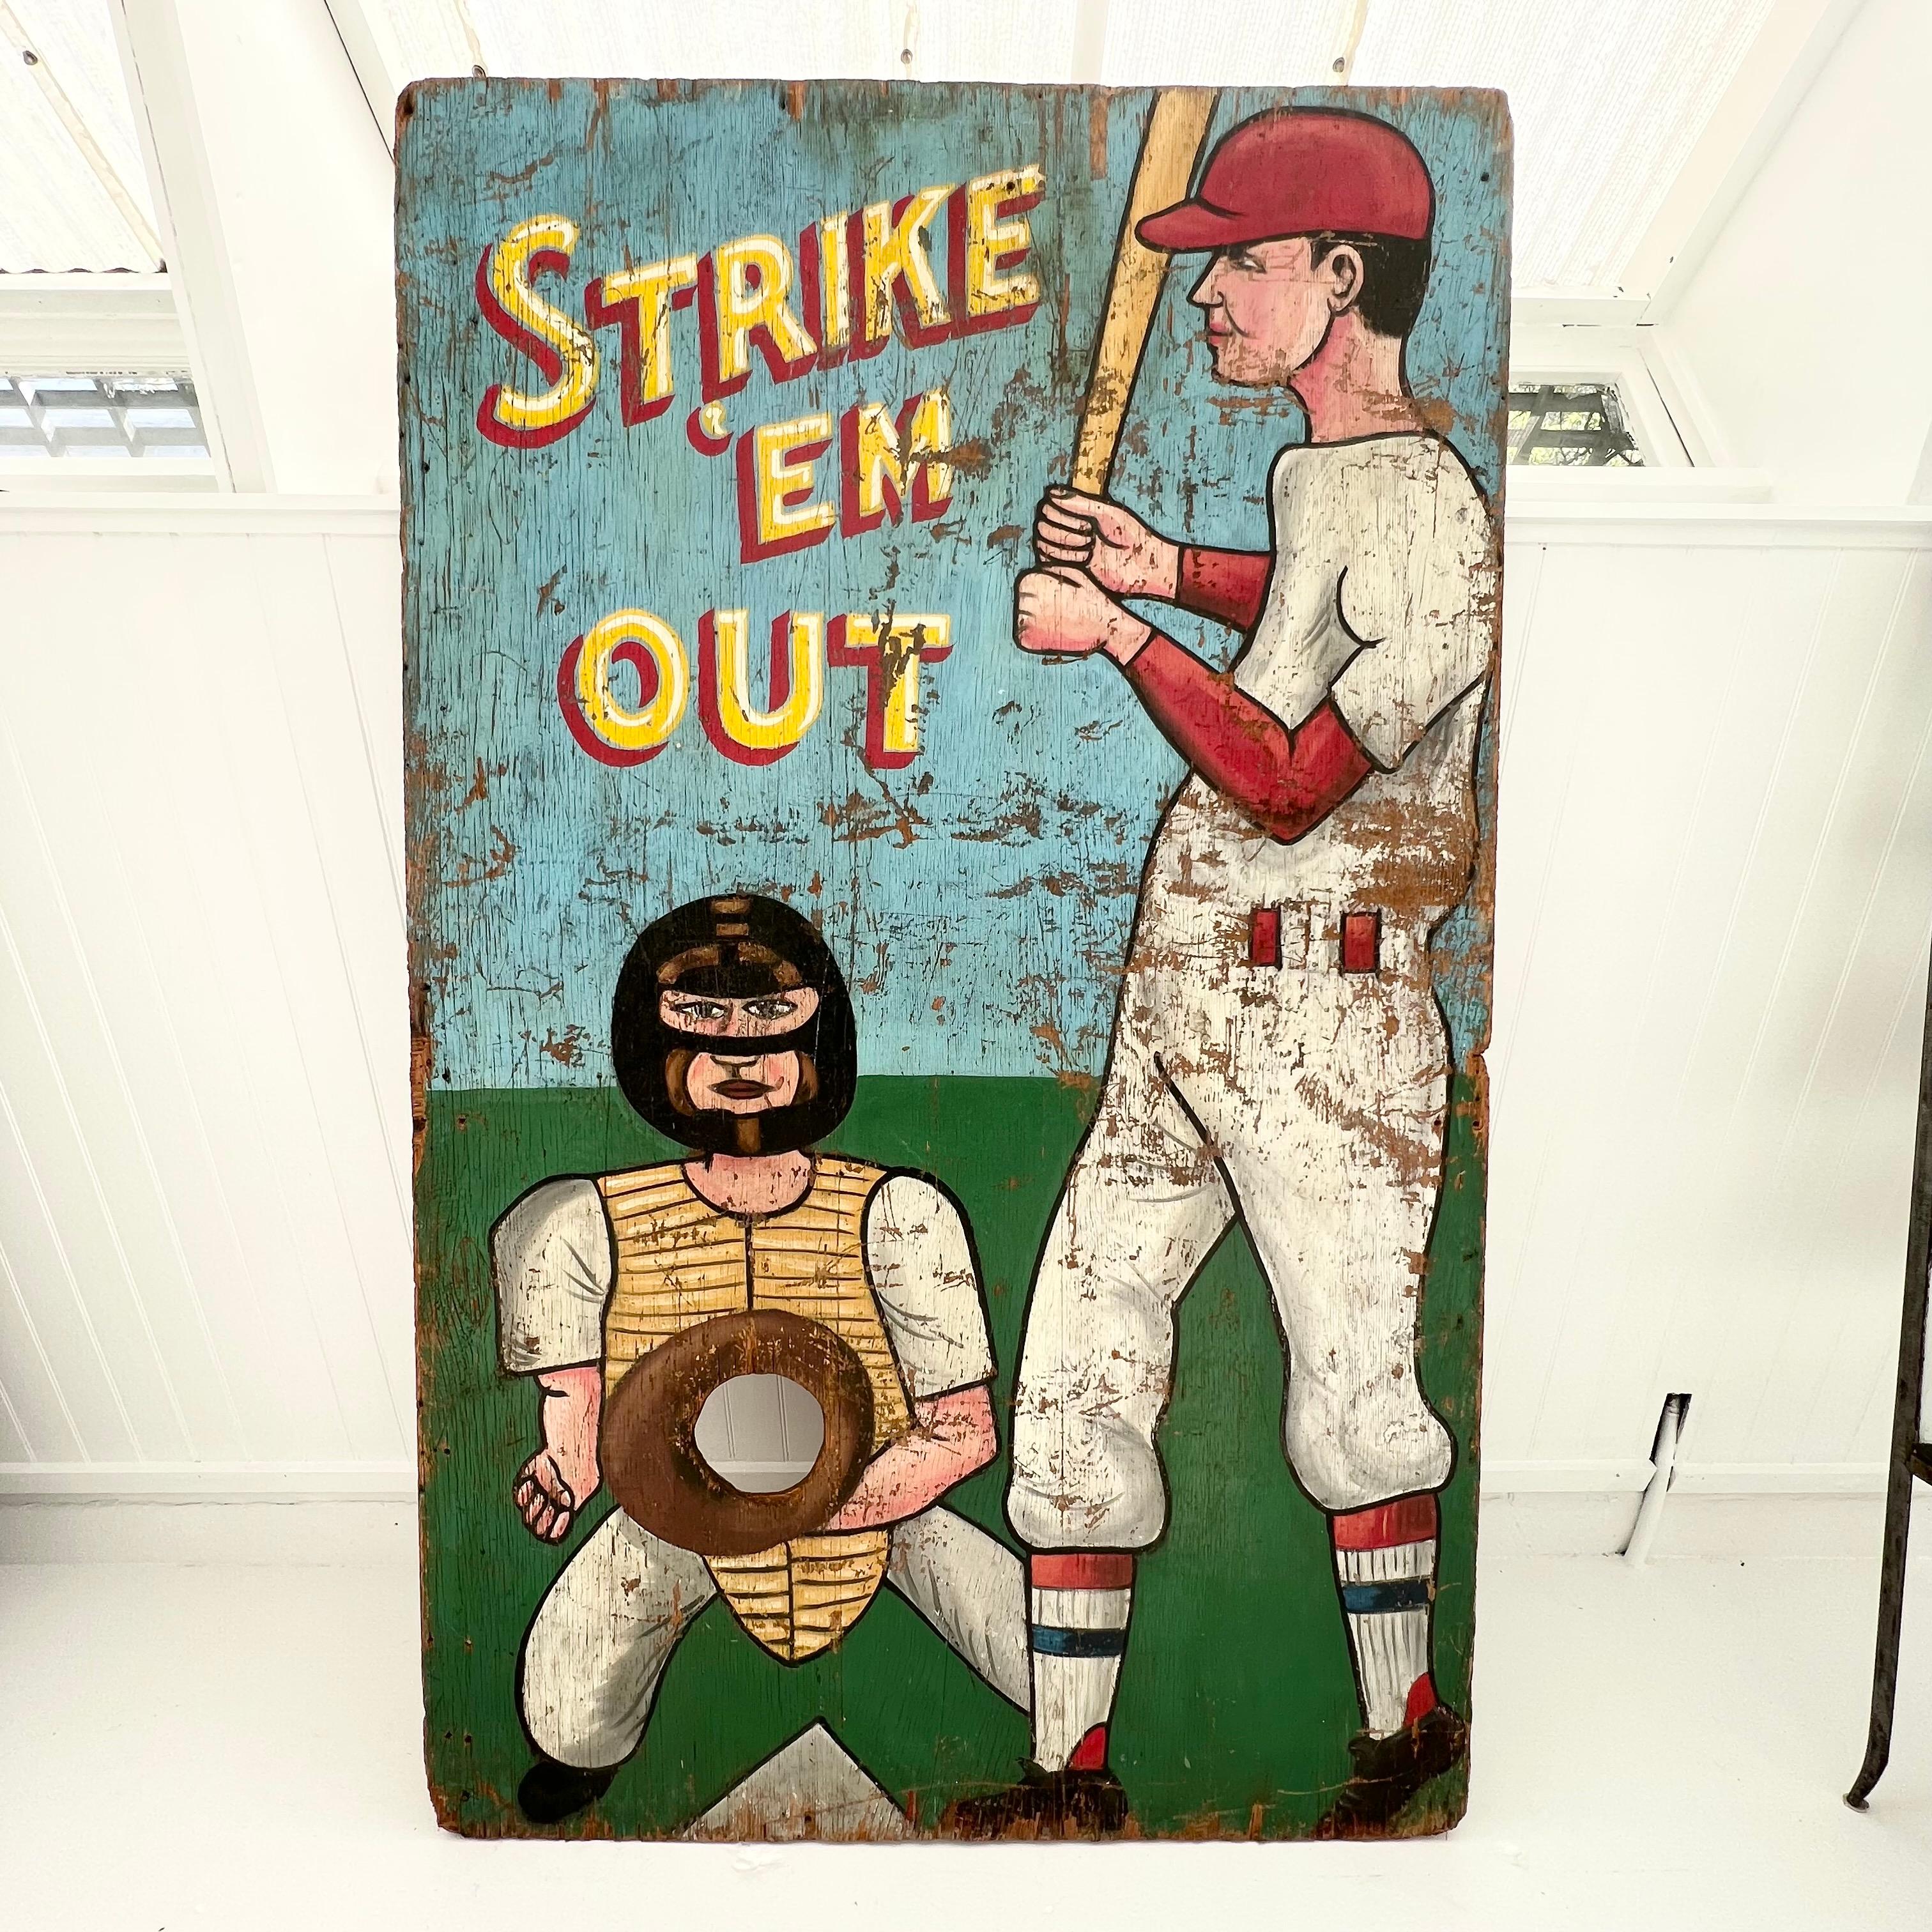 Unique vintage, mid-20th century “Strike ‘Em Out” game sign. 6.5 feet tall and 4 feet wide. Hand painted on 0.75 inch thick plywood. Strike Out originated as a baseball-like street game but also became a popular carnival attraction, where a pitcher